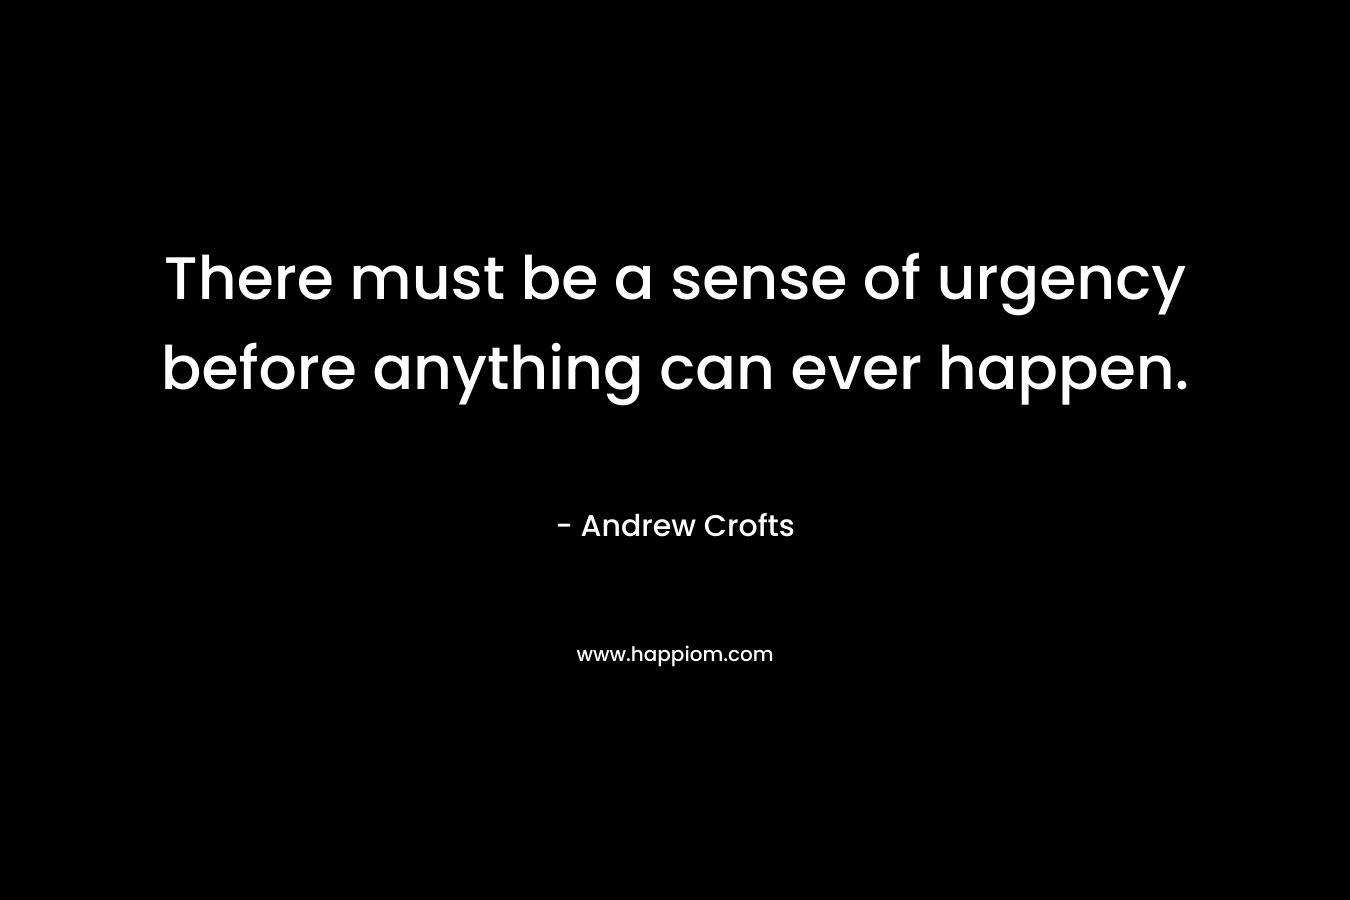 There must be a sense of urgency before anything can ever happen.